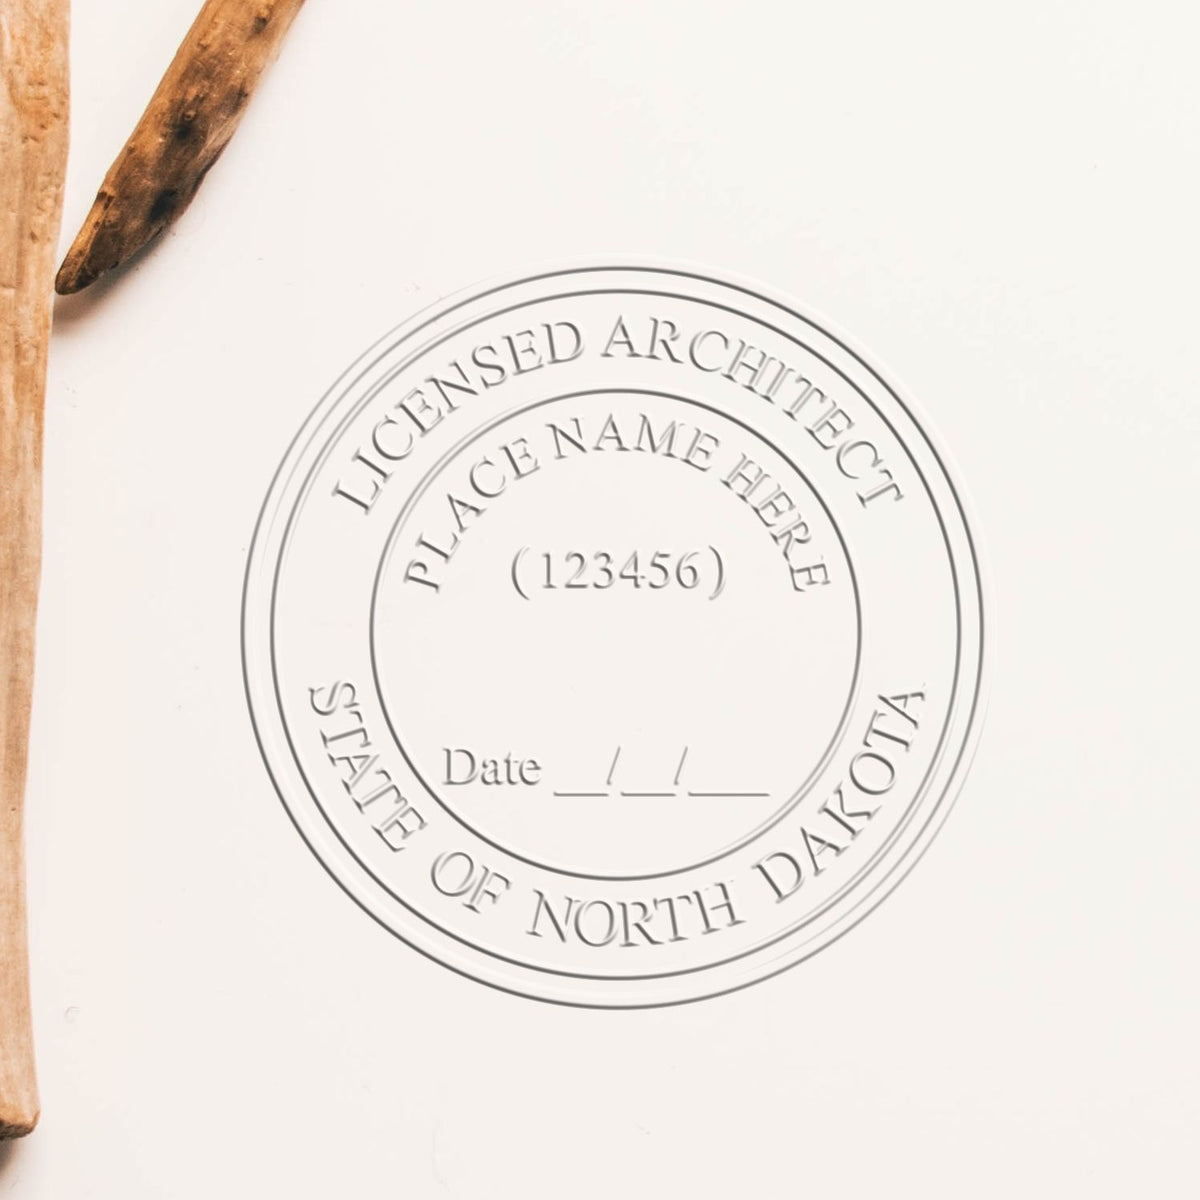 A lifestyle photo showing a stamped image of the North Dakota Desk Architect Embossing Seal on a piece of paper